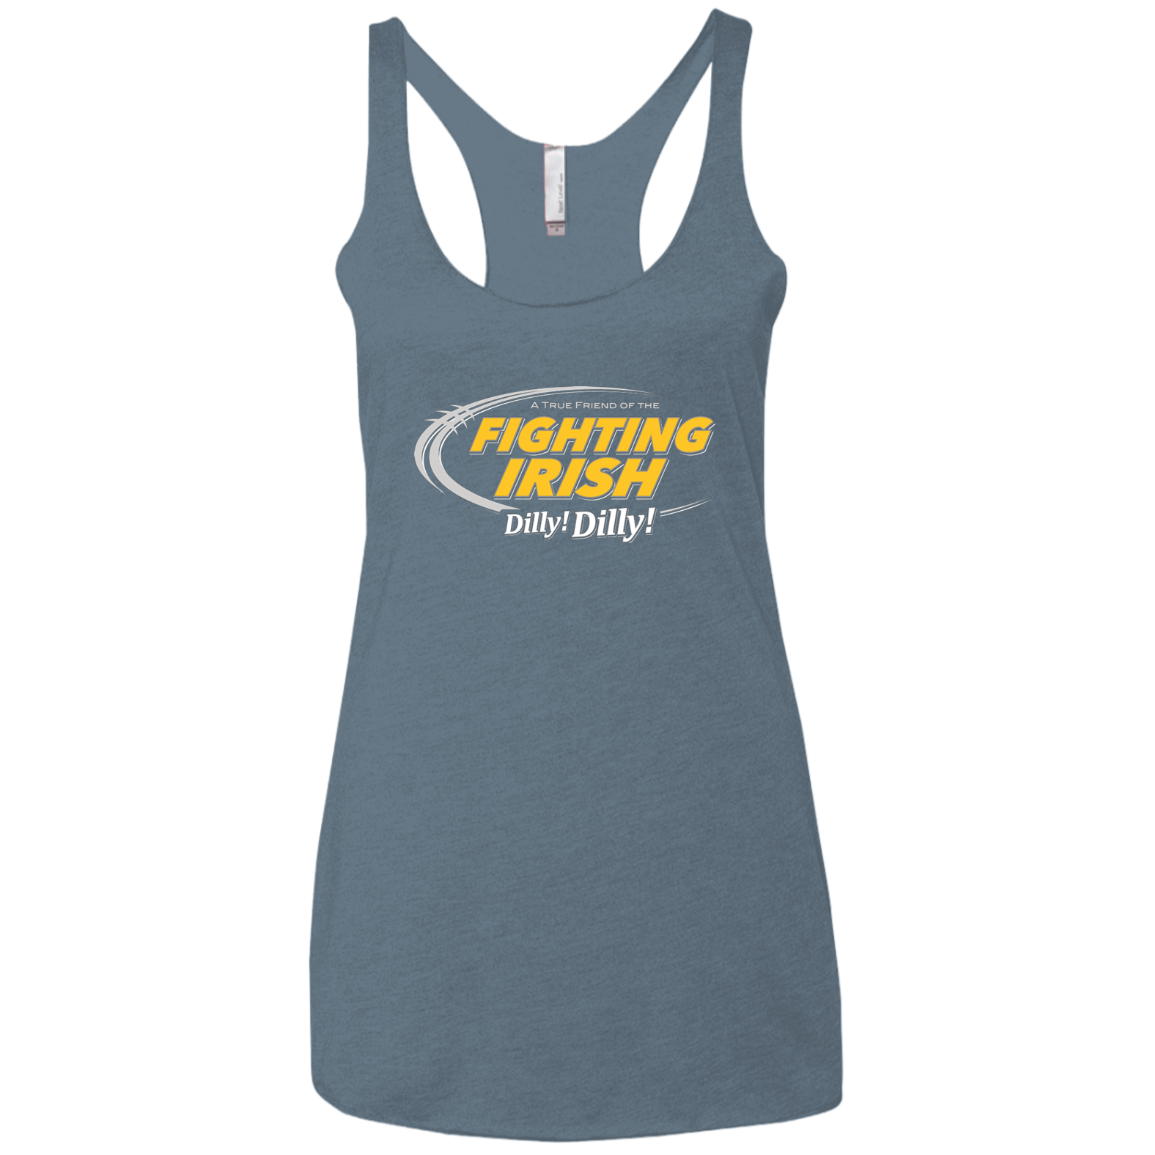 Notre Dame Dilly Dilly Women's Triblend Racerback Tank